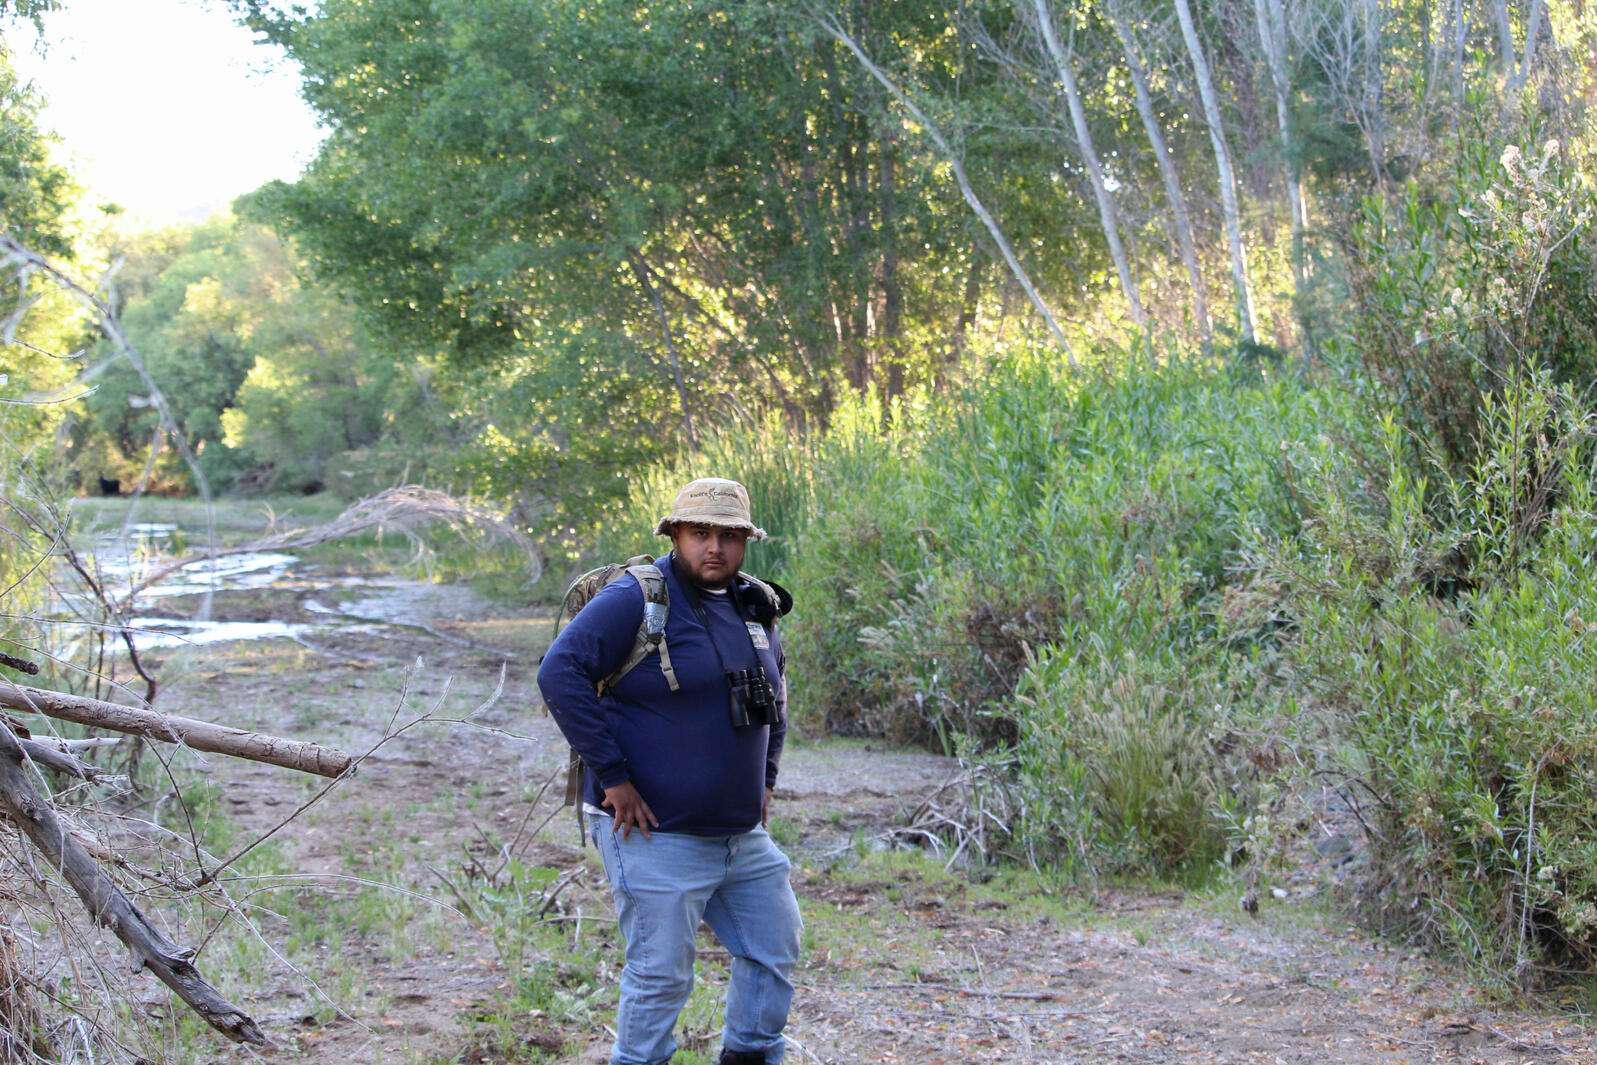 River Pathways intern Max Ayala poses with his field gear near the Agua Fria River.